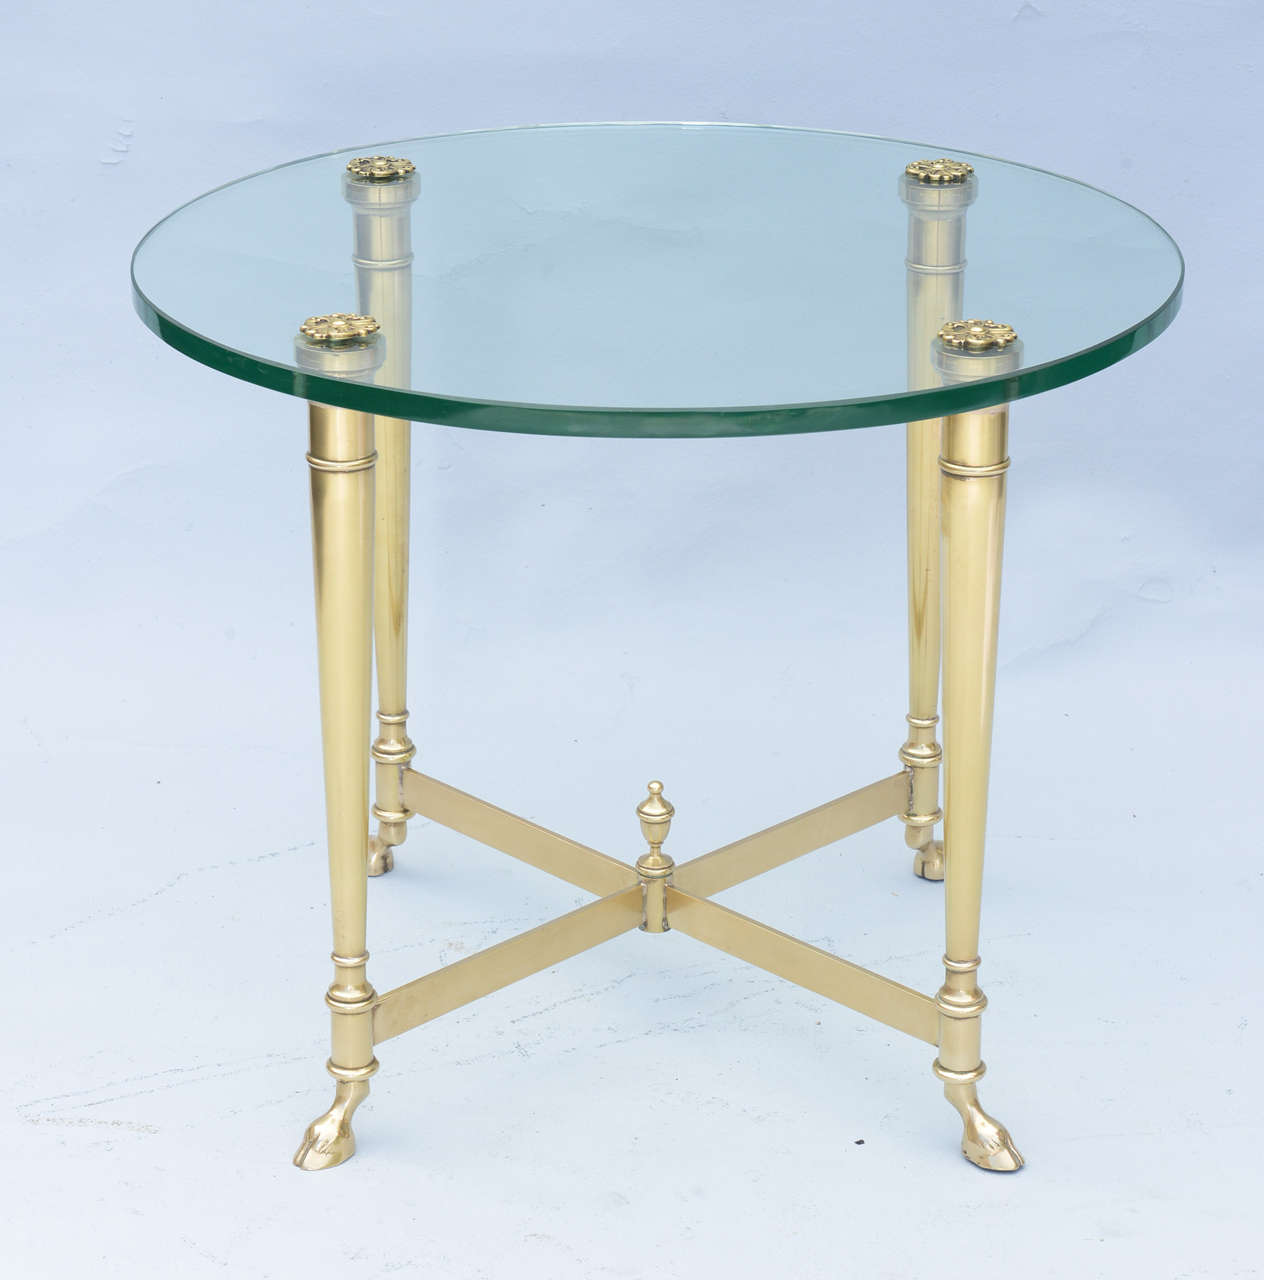 Jansen style, single side or end table, of polished brass, its round glass top secured to legs by rosettes, raised on round tapering legs, joined by X-stretcher, centered by a finial, terminating in hoofed feet.

Stock ID: D4365